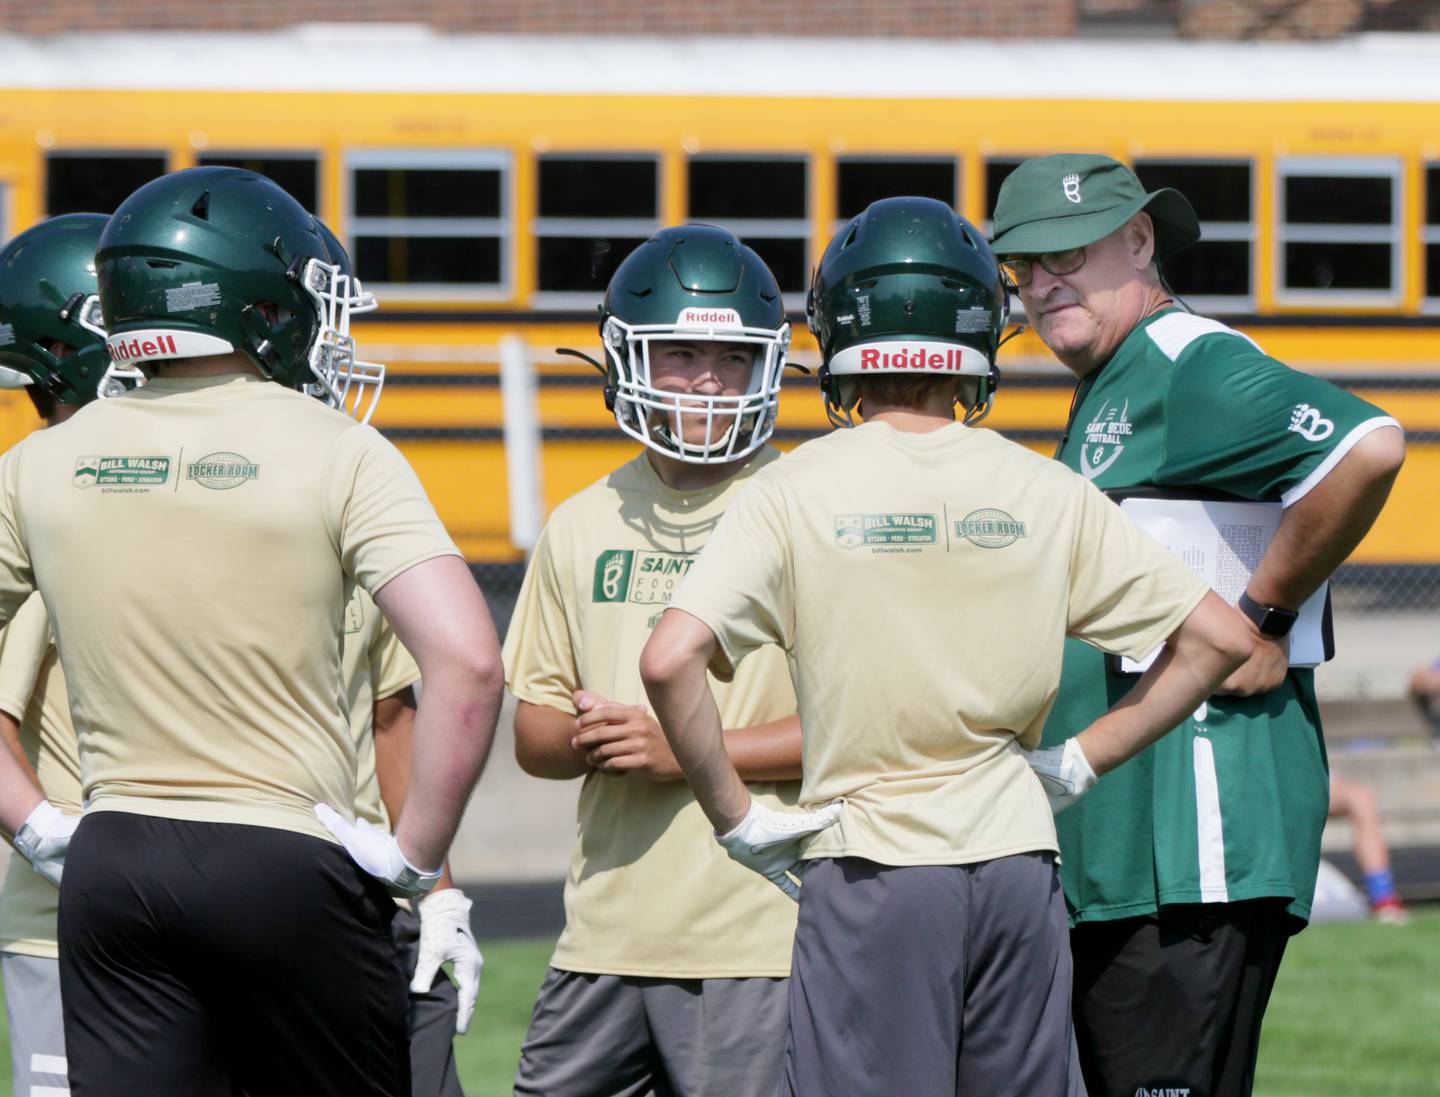 St. Bede head coach Jim Eustice, (right) talks to his players before playing Morrison at the Princeton 7 on 7 event at Princeton High School on Saturday July 17, 2021.